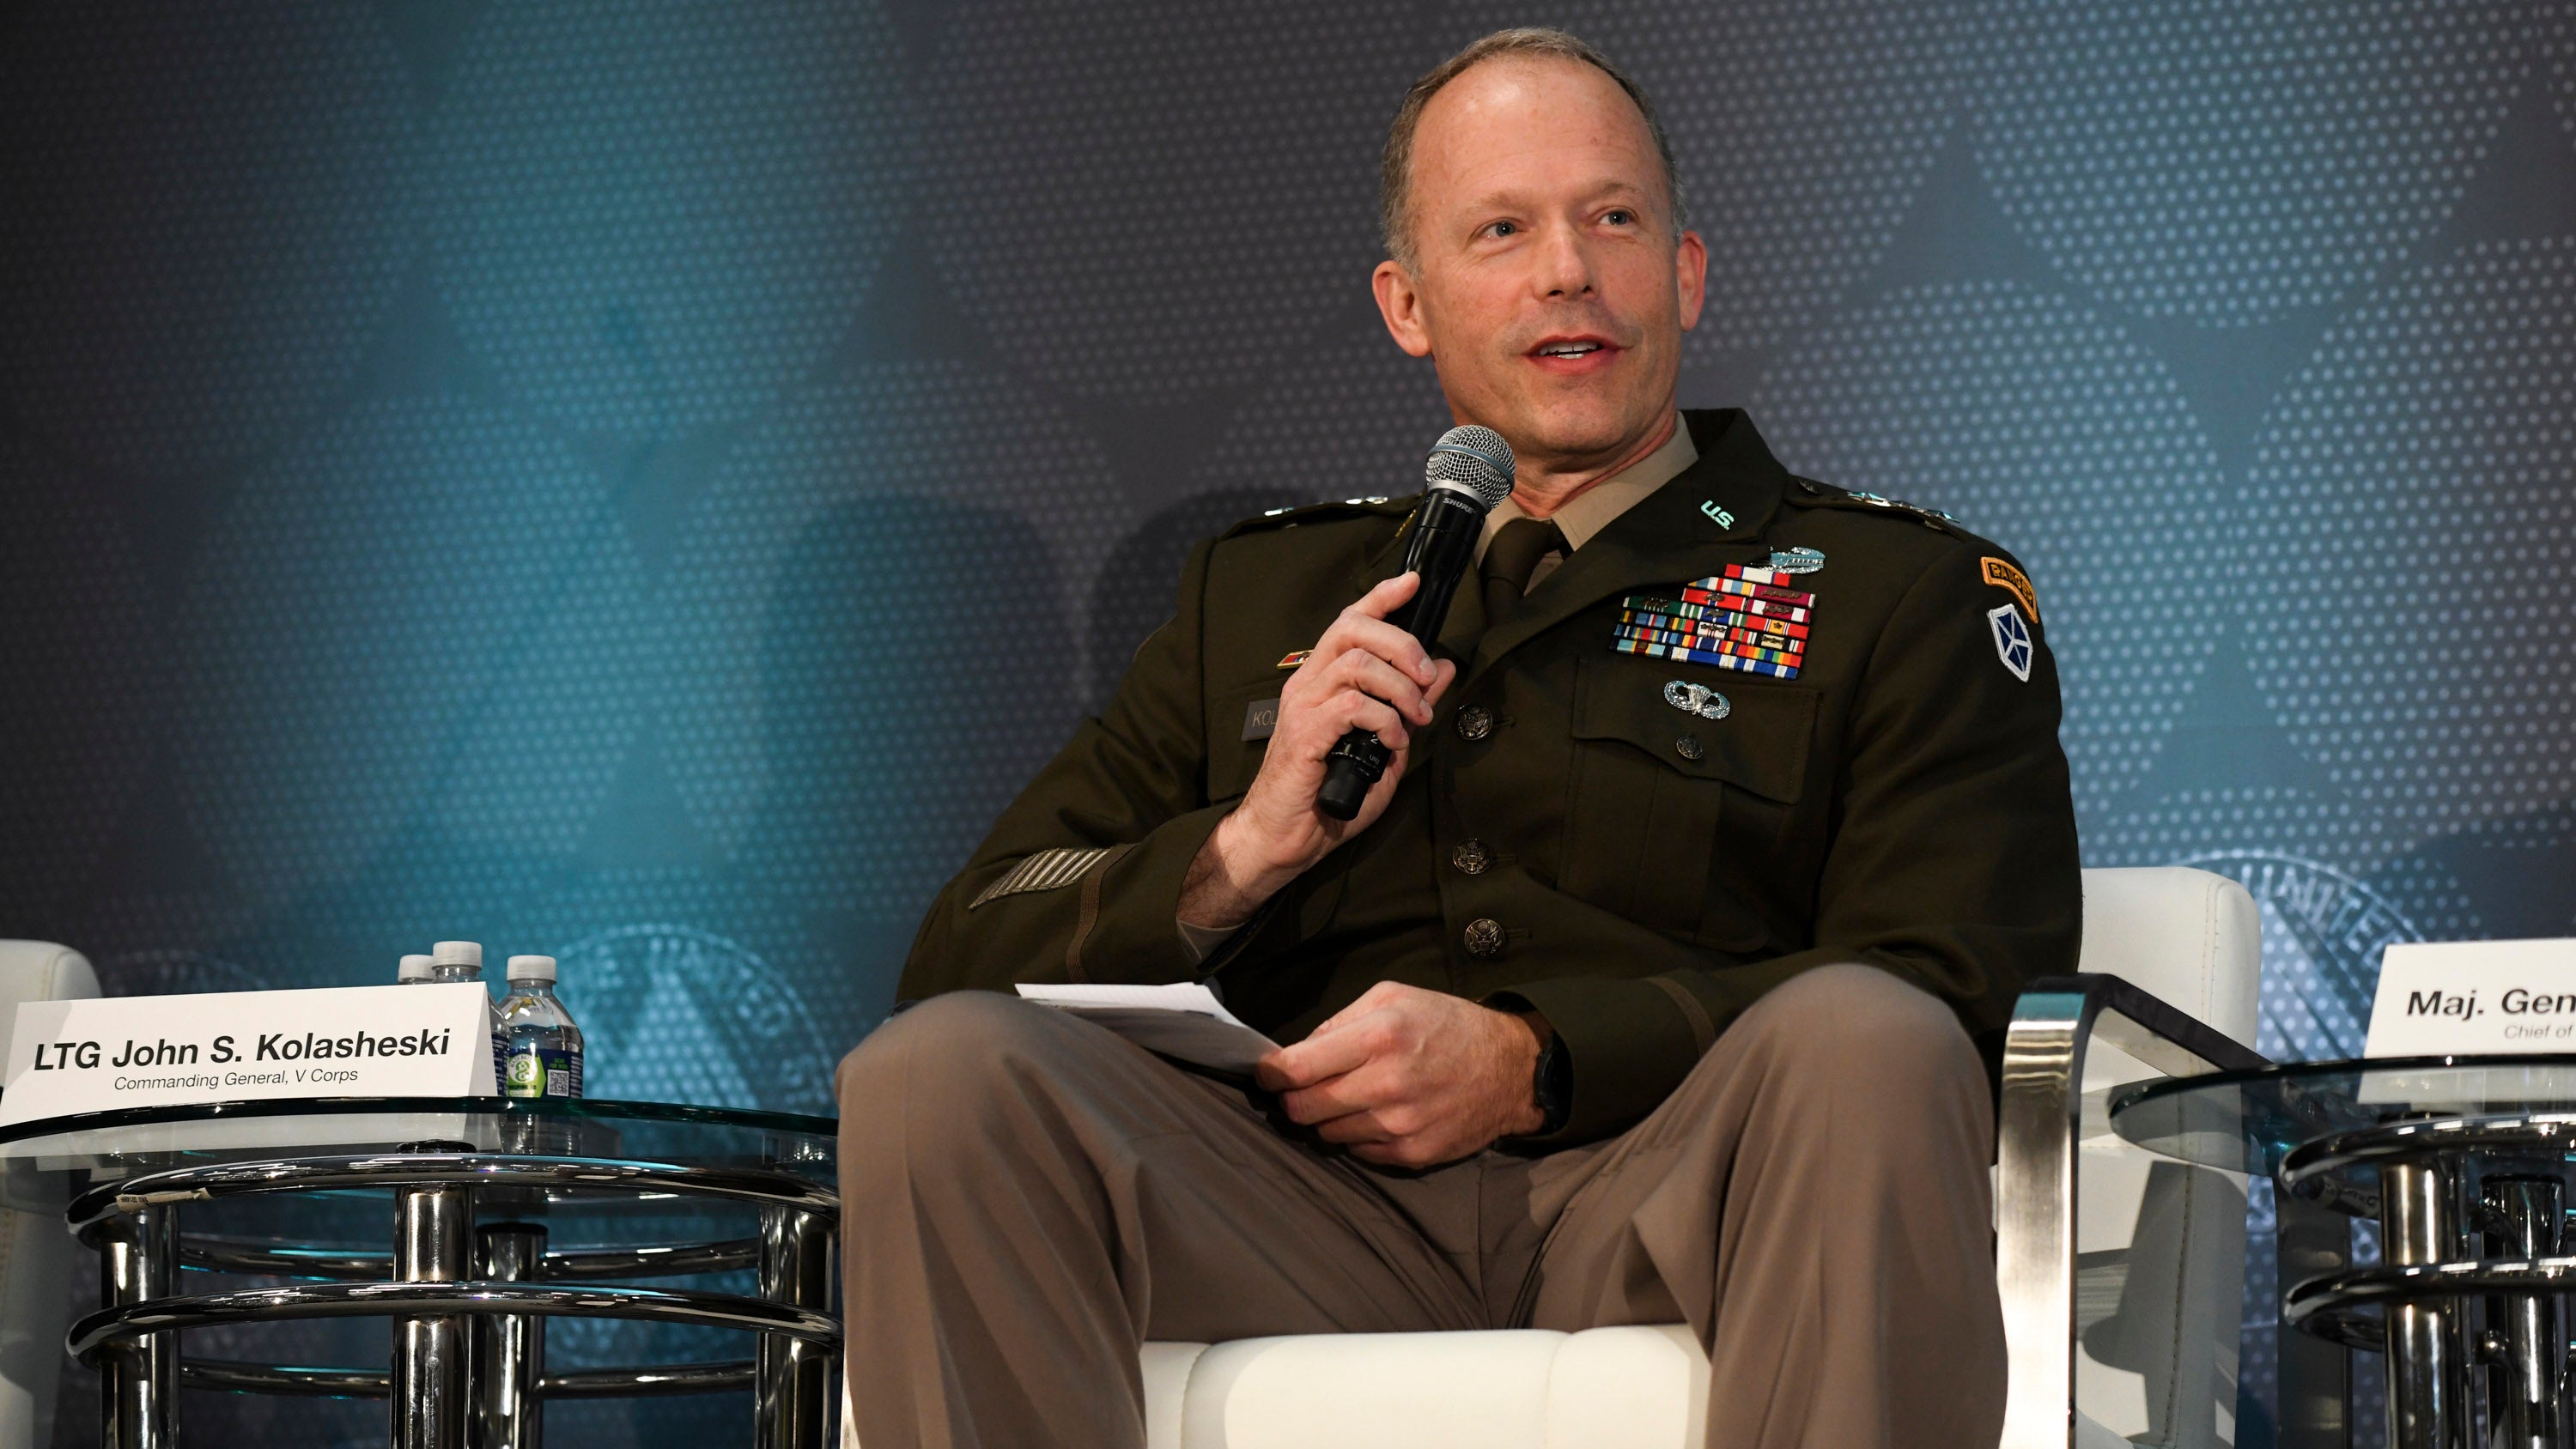 Lt. Gen. John Kolasheski, commander of V Corps, speaks during the AUSA Contemporary Military Forum: Landpower - The Contested European Theater session at the AUSA 2022 Annual Meeting in Washington, D.C., Wednesday, Oct. 12, 2022. (Carol Guzy for AUSA)